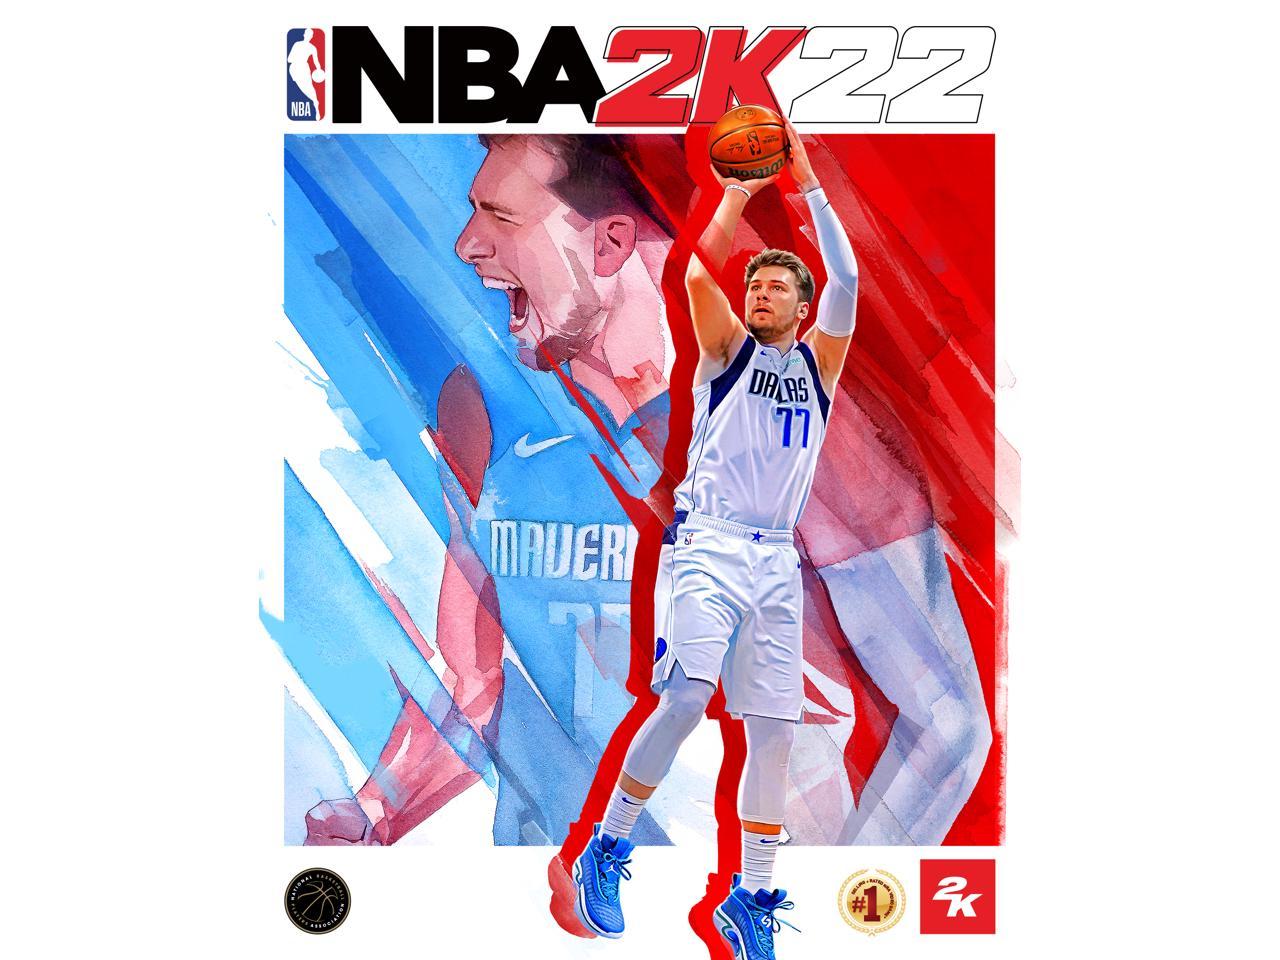 NBA 2K22 for PC [Steam Game Code] $17.79